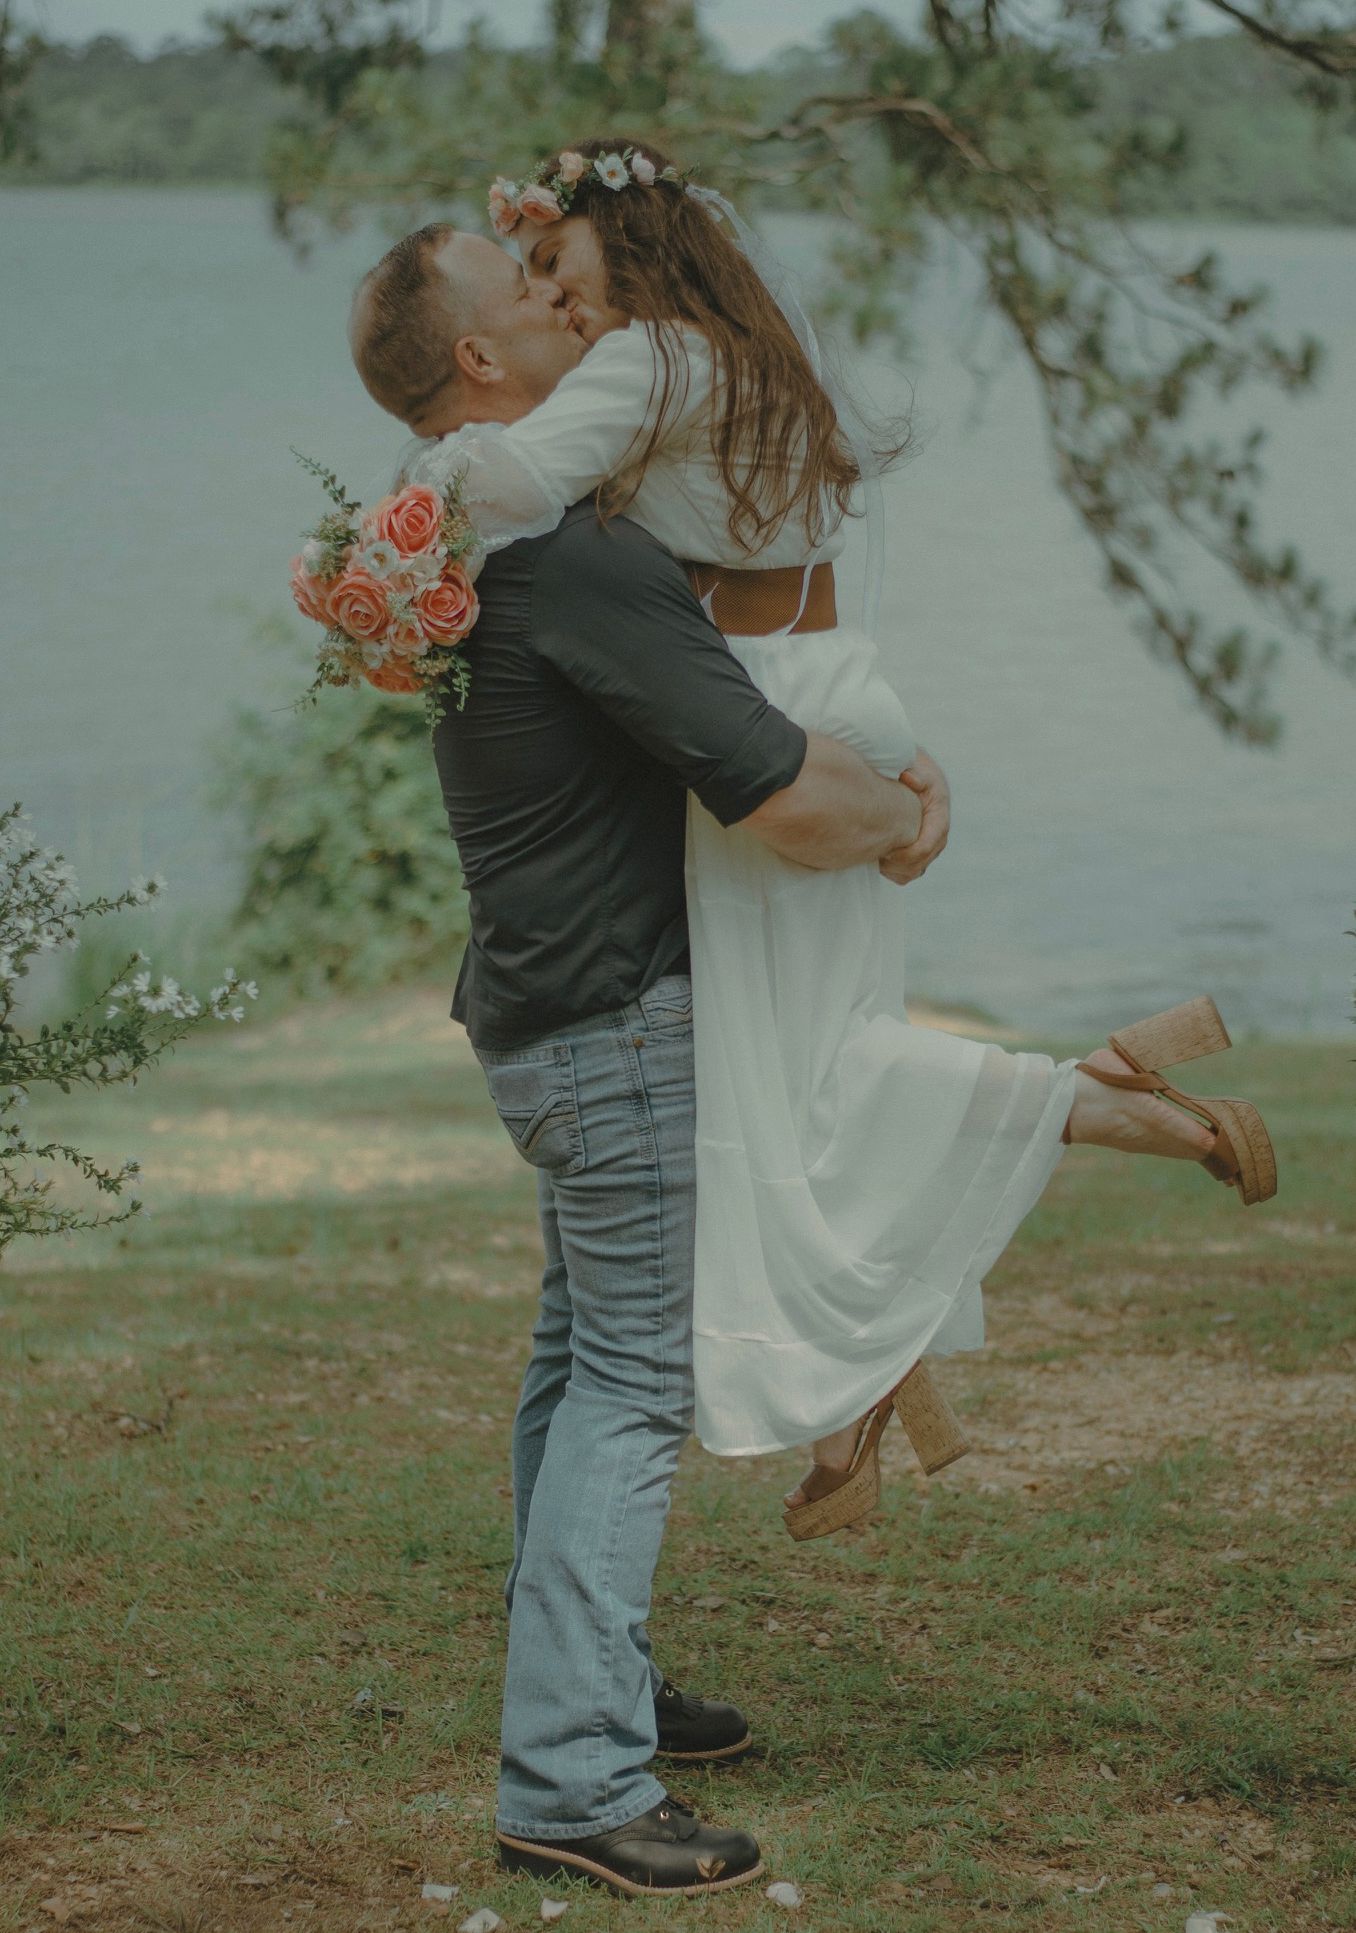 An excited bride leaps into her new husband's arms for a kiss. Her husband holds her above the ground as they kiss in front of a beautiful lake